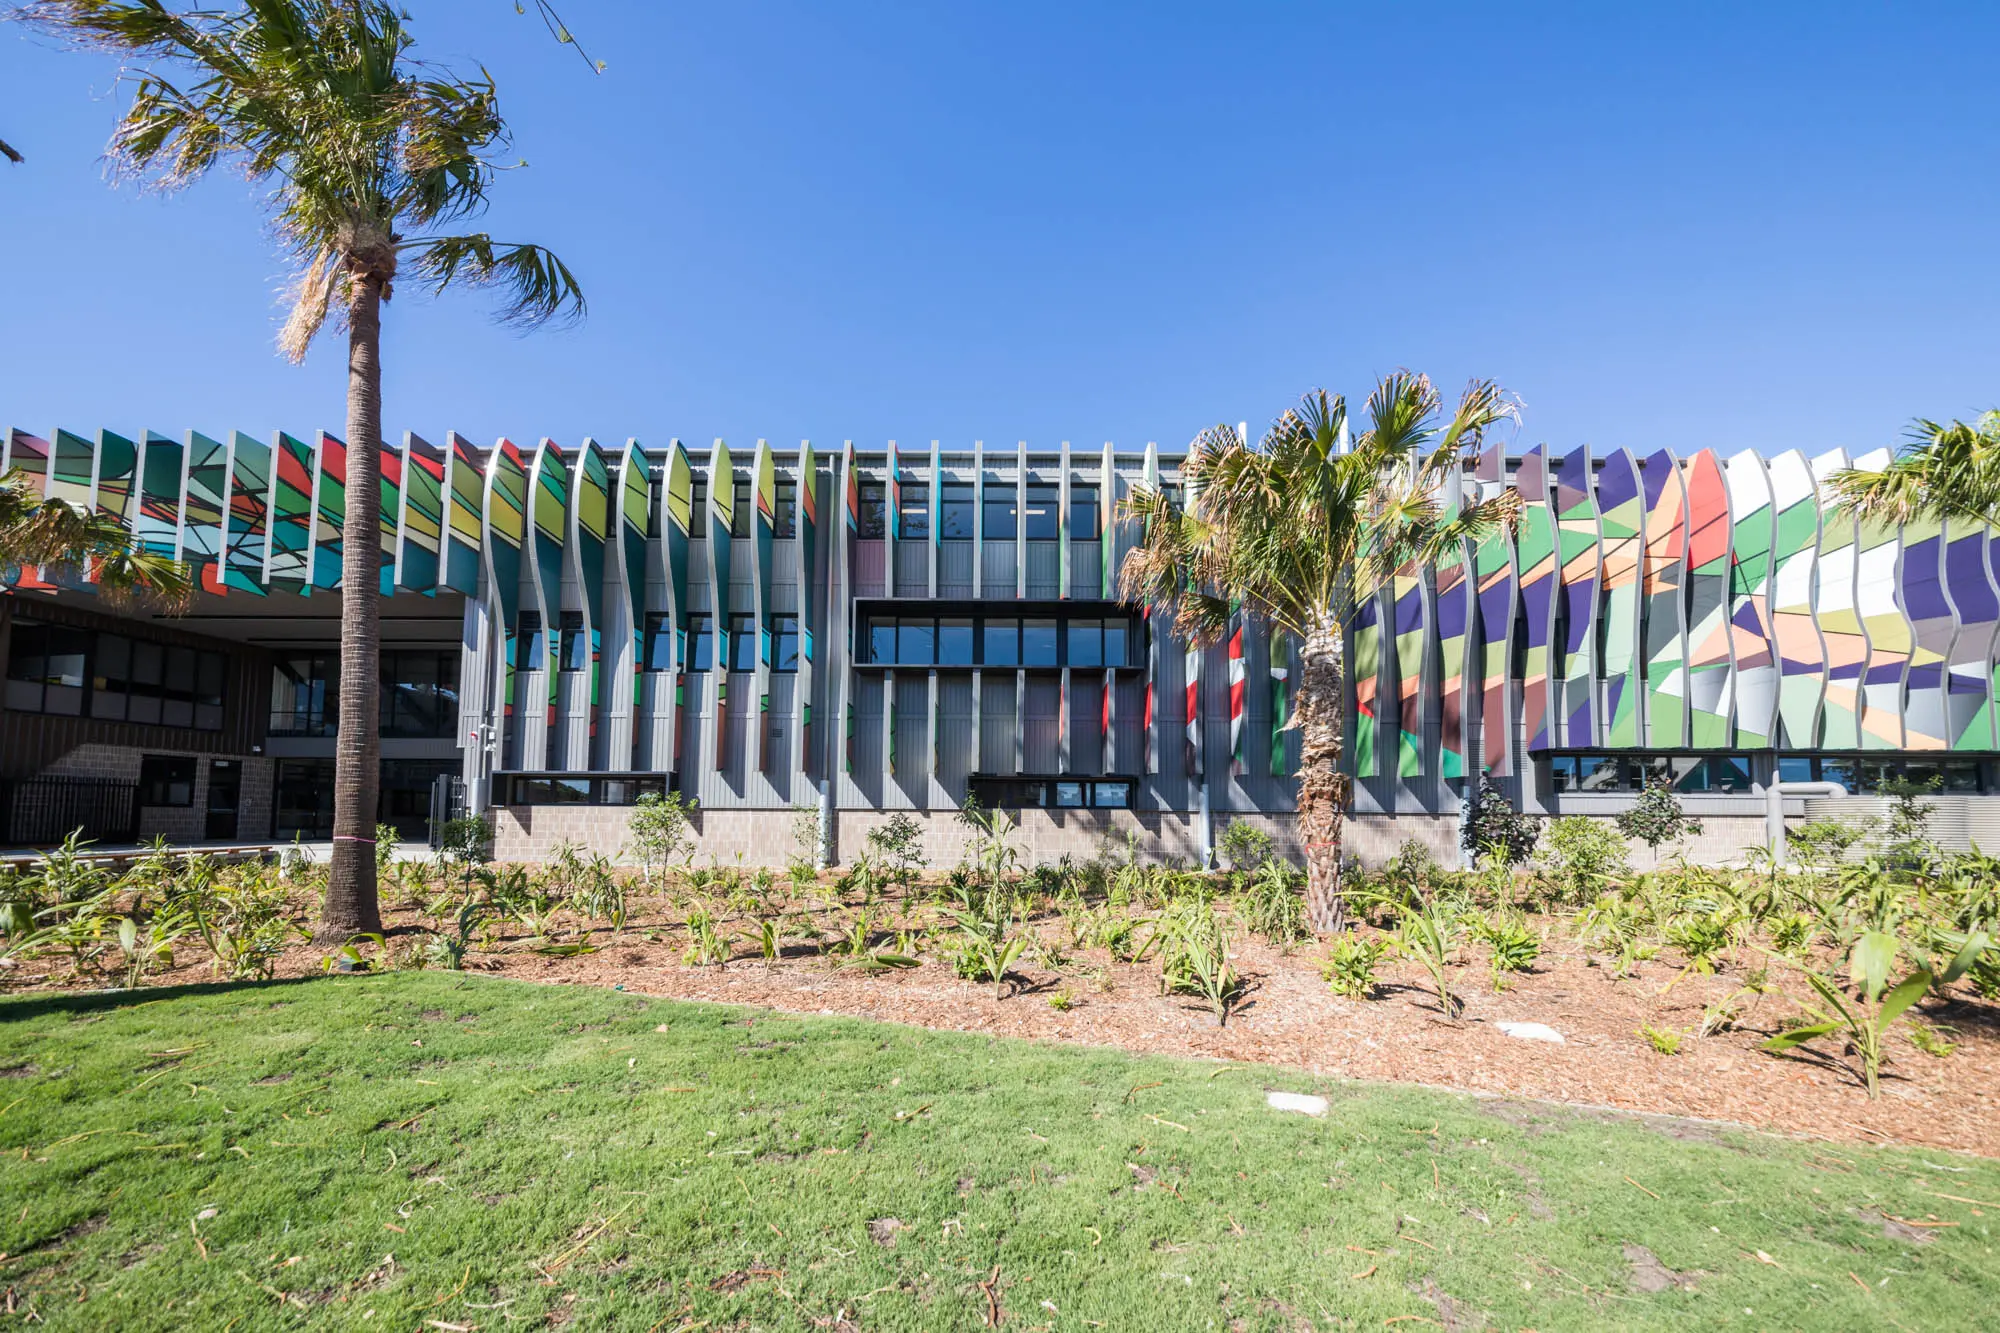 Exterior school building with multi-coloured louvres. Palm trees in the foreground.